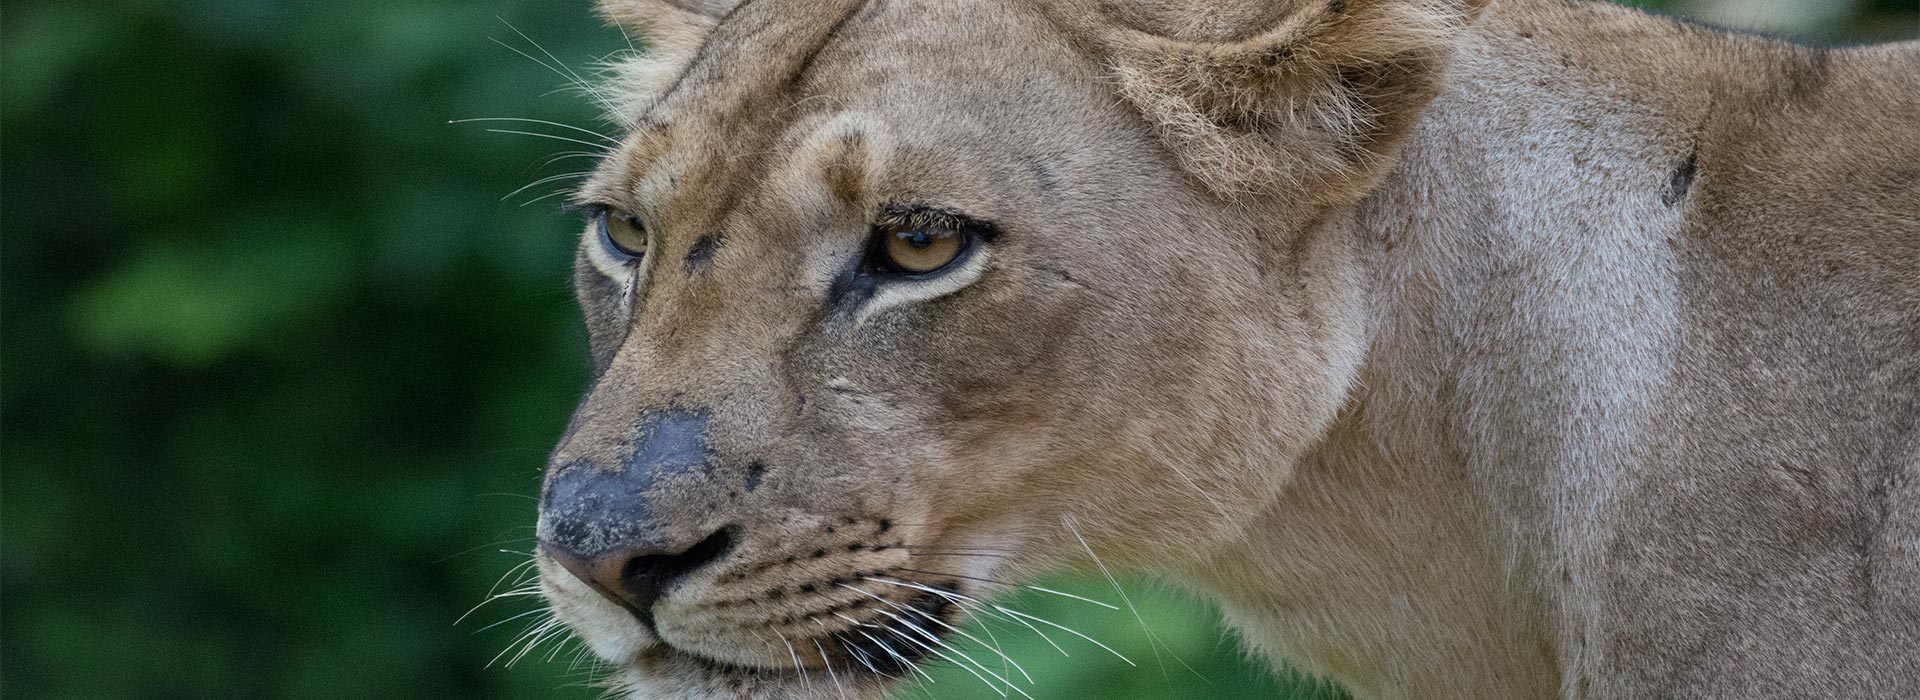 Finding Wildlife - Tessa Manning - Conjour Wildlife Photography Feature - Lioness Zambia